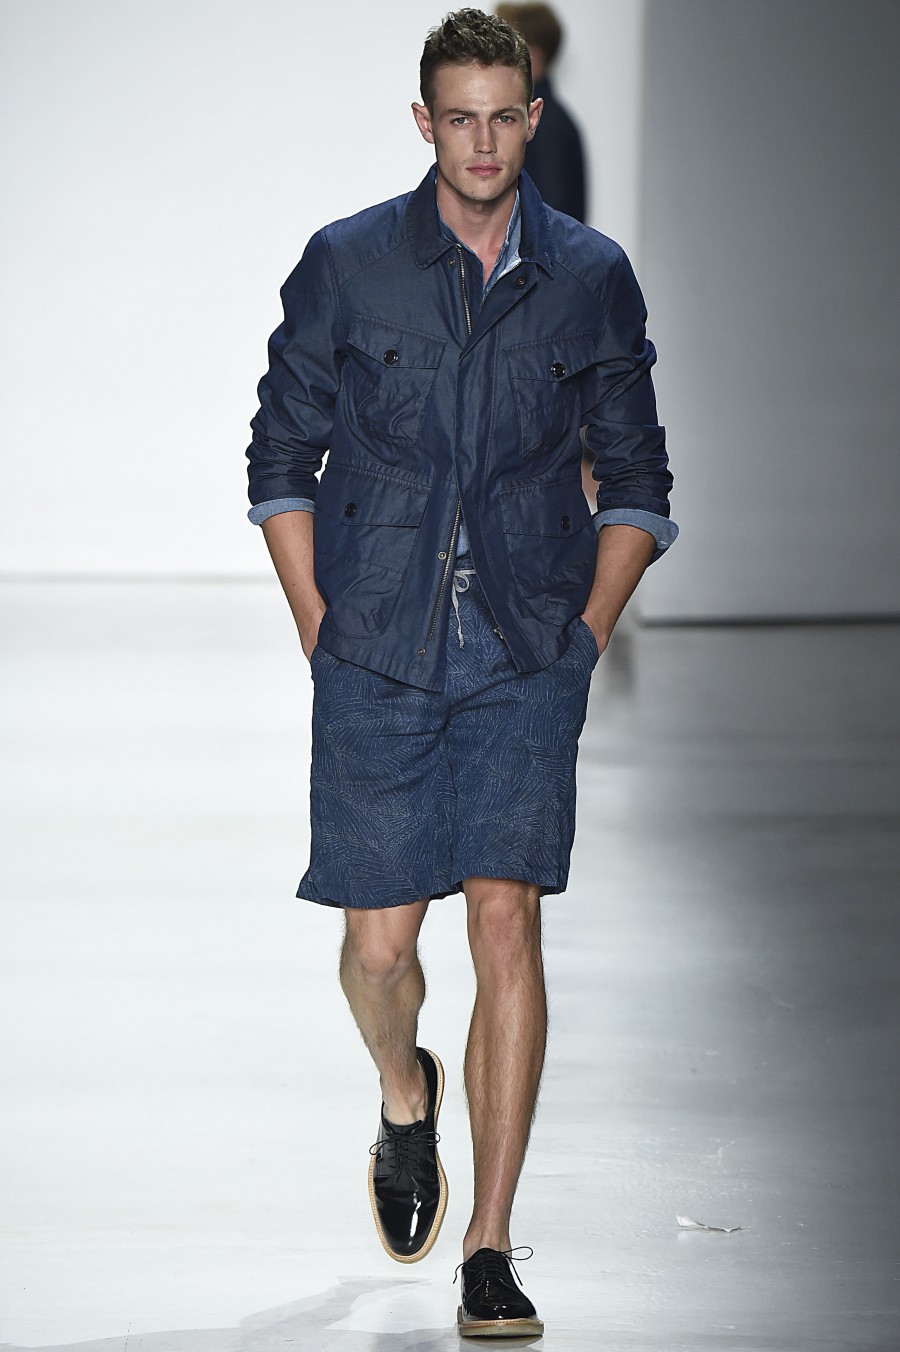 Todd Snyder's Spring 2016 Collection - Daily Front Row